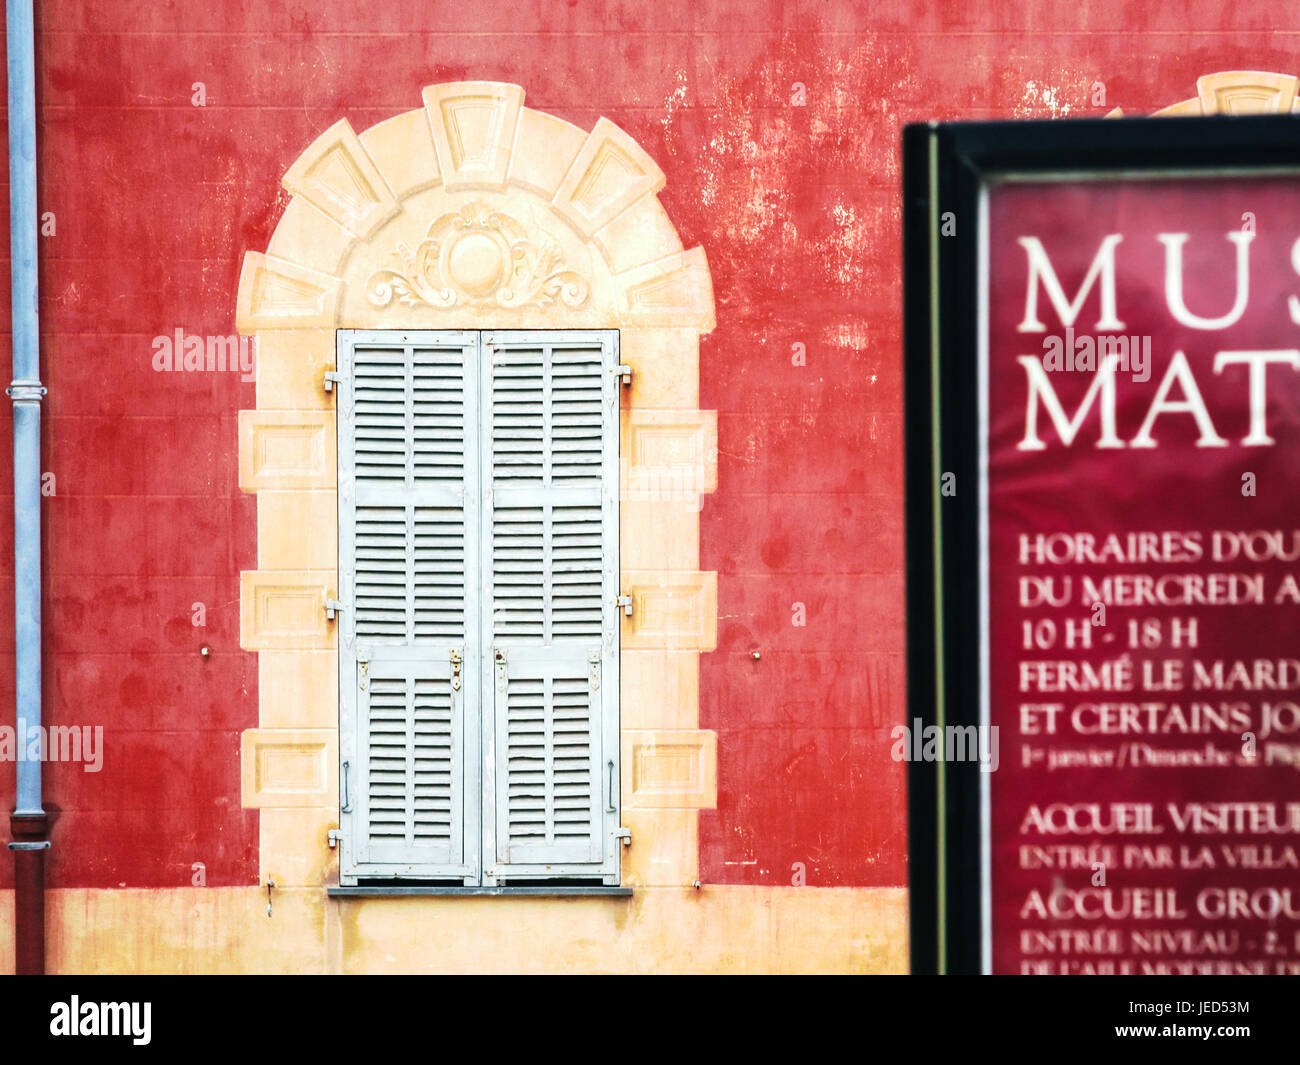 NICE, FRANCE - JULY 6, 2008: wall of Musee Matisse (Matisse Museum) in Nice city. The museum was opened in 1963, it is located in the Villa des Arenes Stock Photo